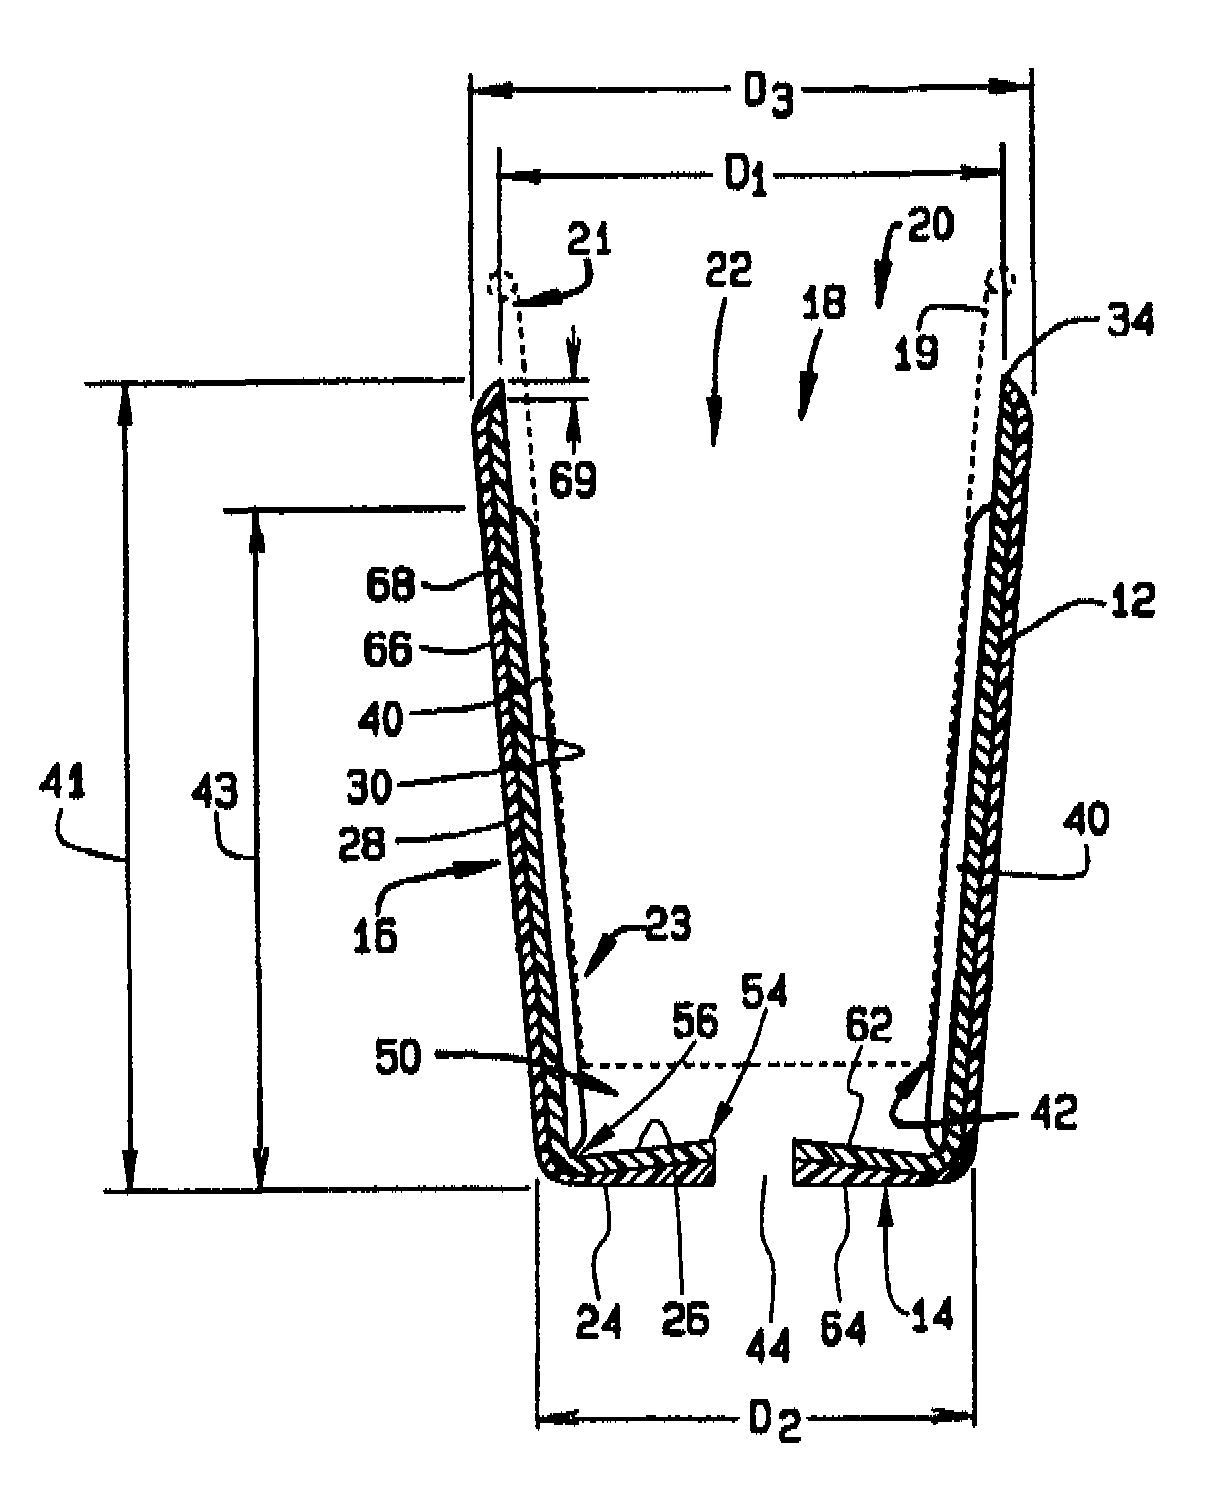 Method and apparatus for insulating fluids contained within a container